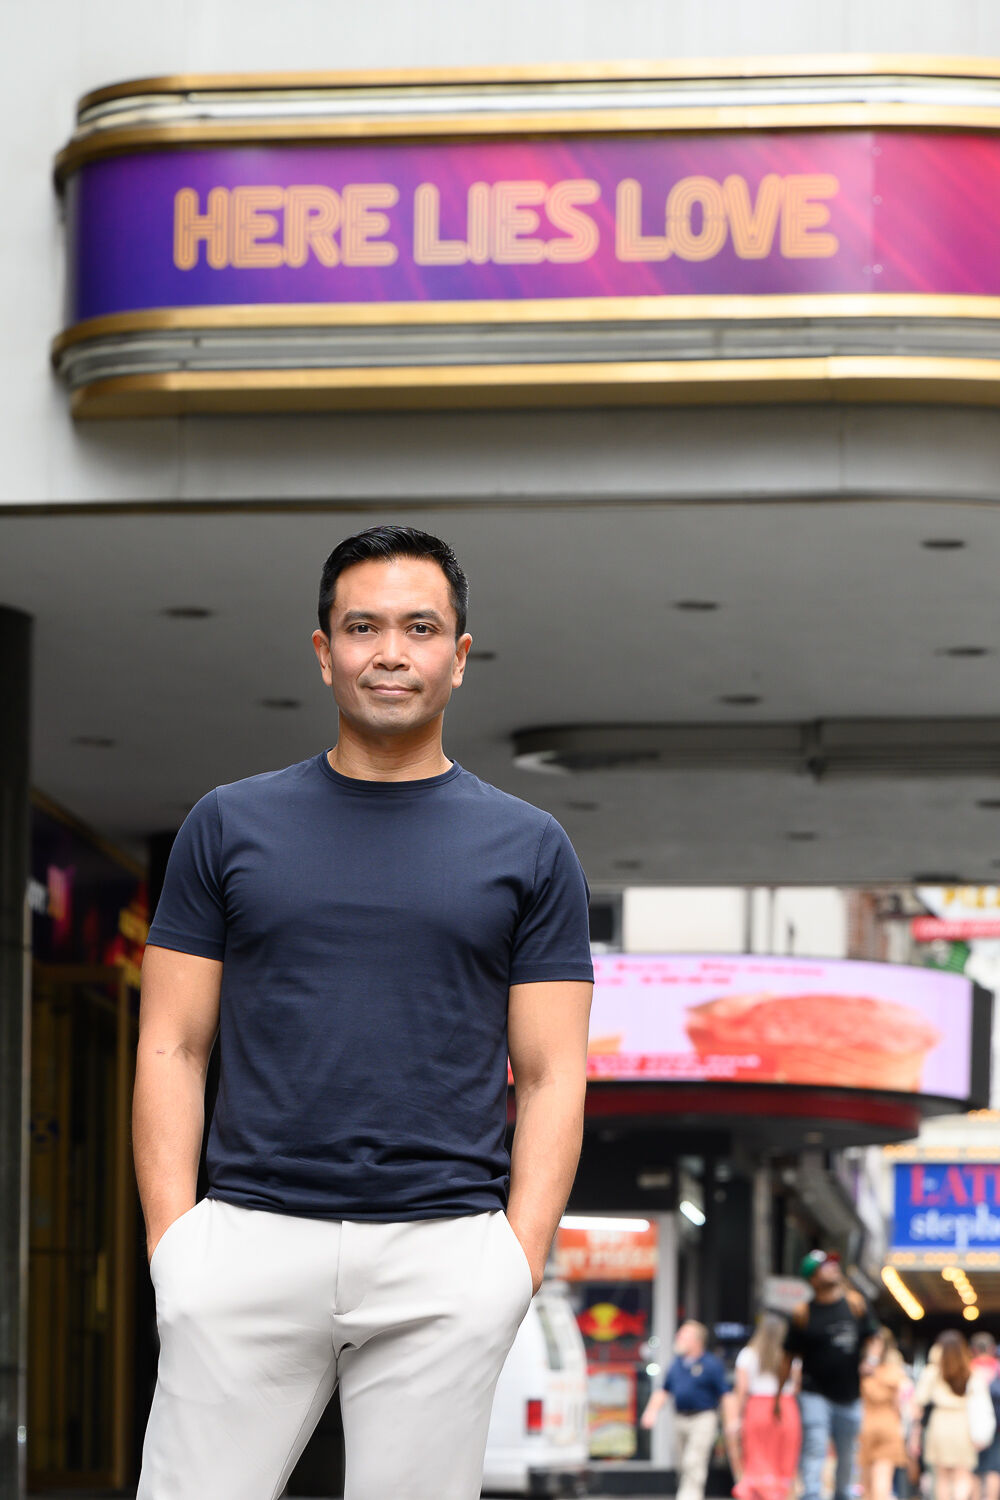 Jose Llana stands in front of the marquee for "Here Lies Love" at the Broadway Theatre.